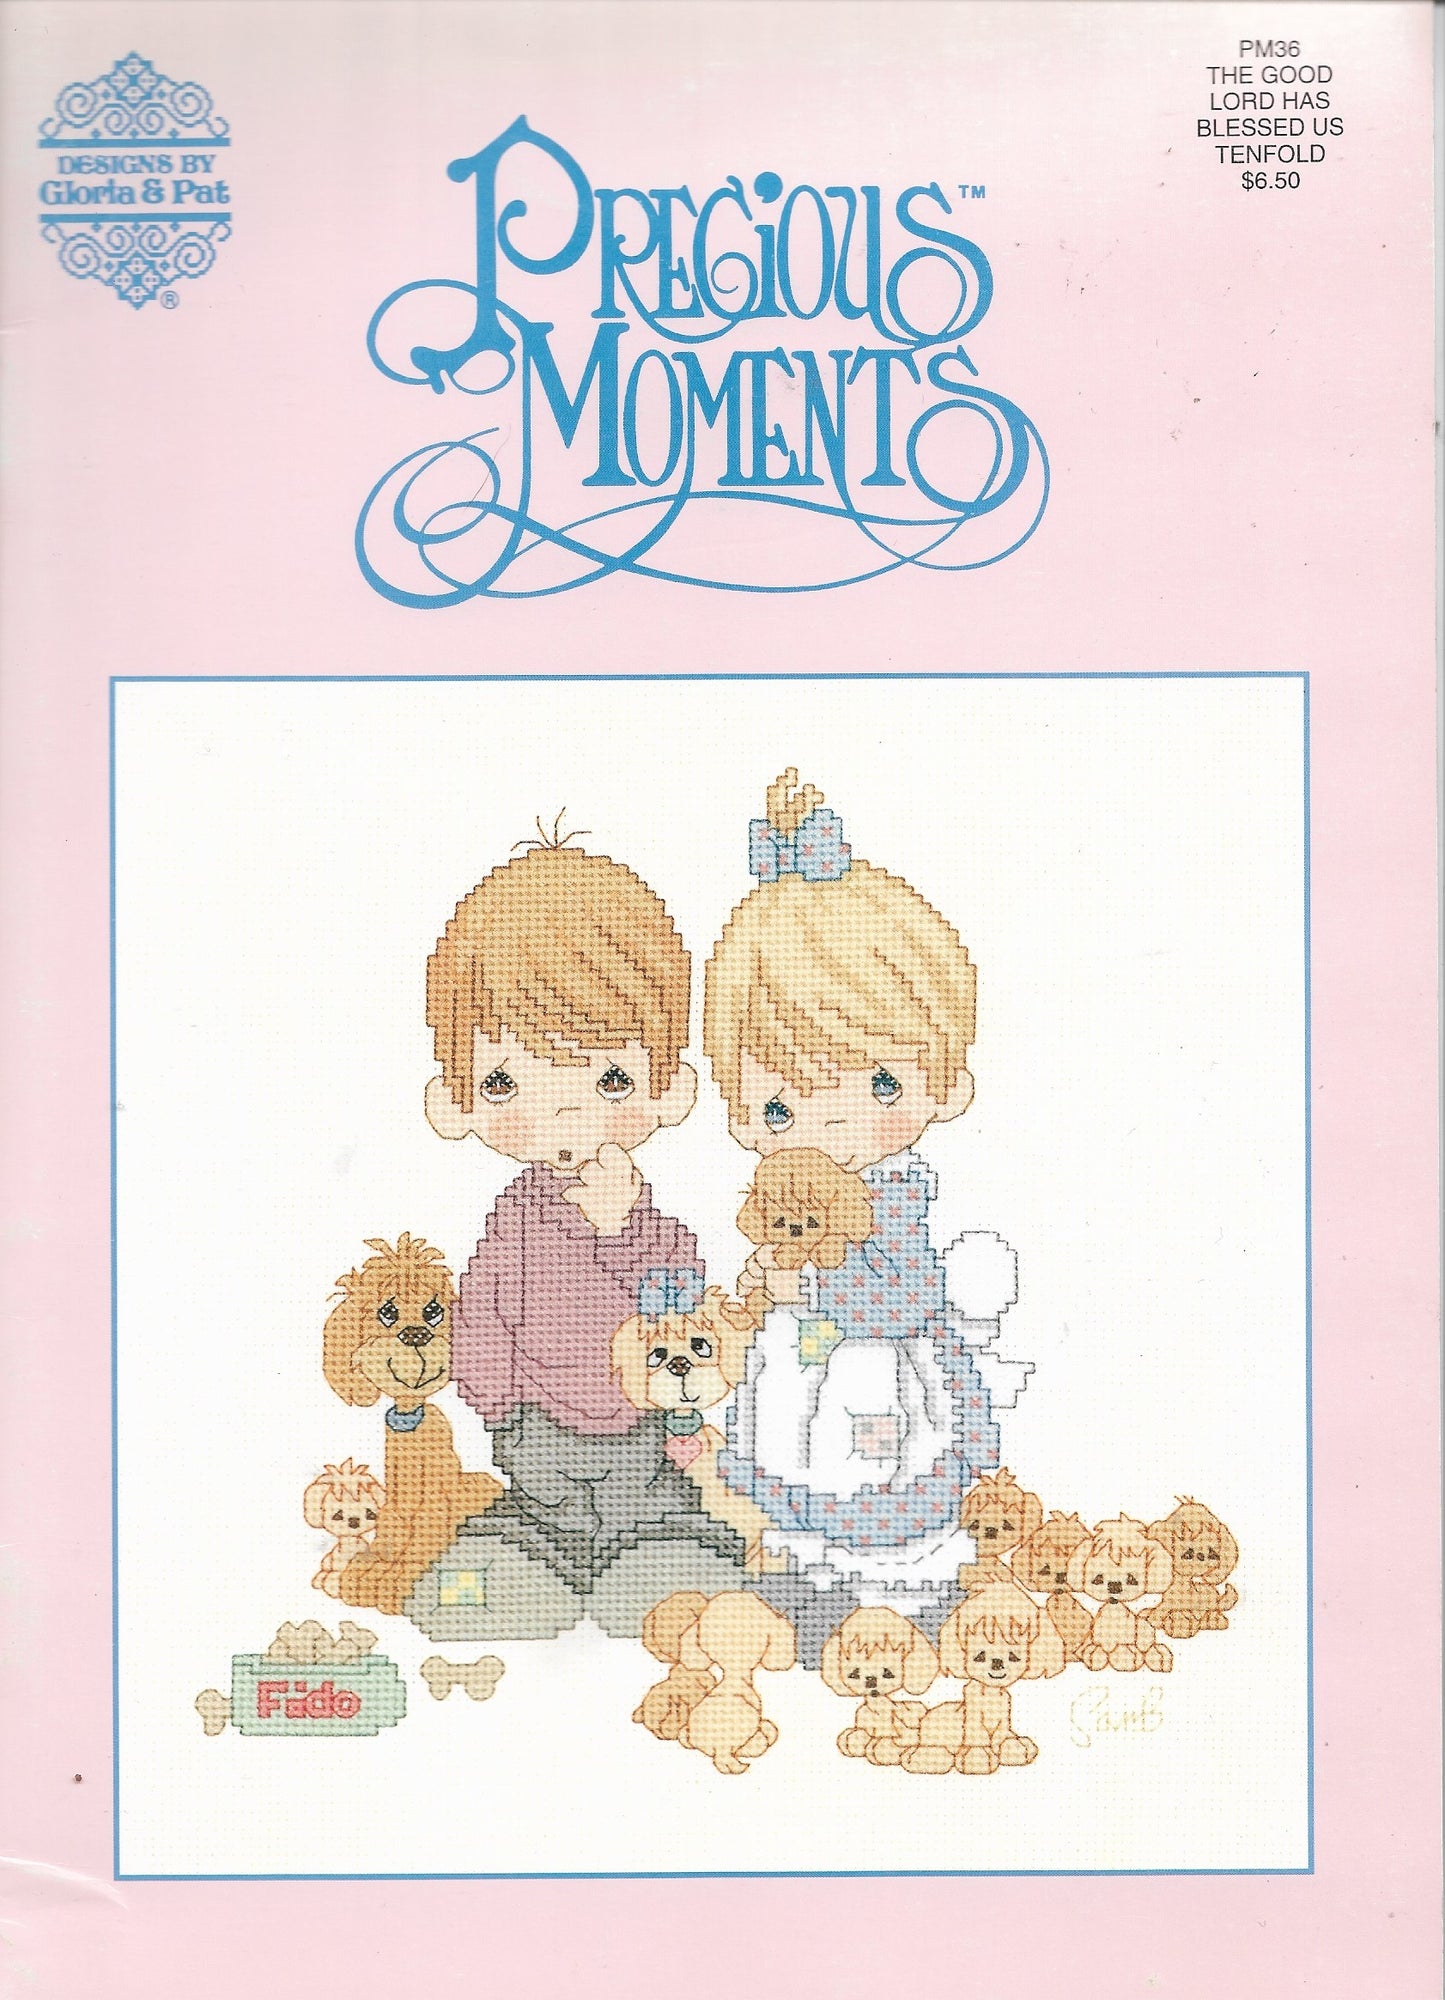 Gloria & Pat Precious Moments The good Lord has blessed us tenfold PM36 cross stitch pattern